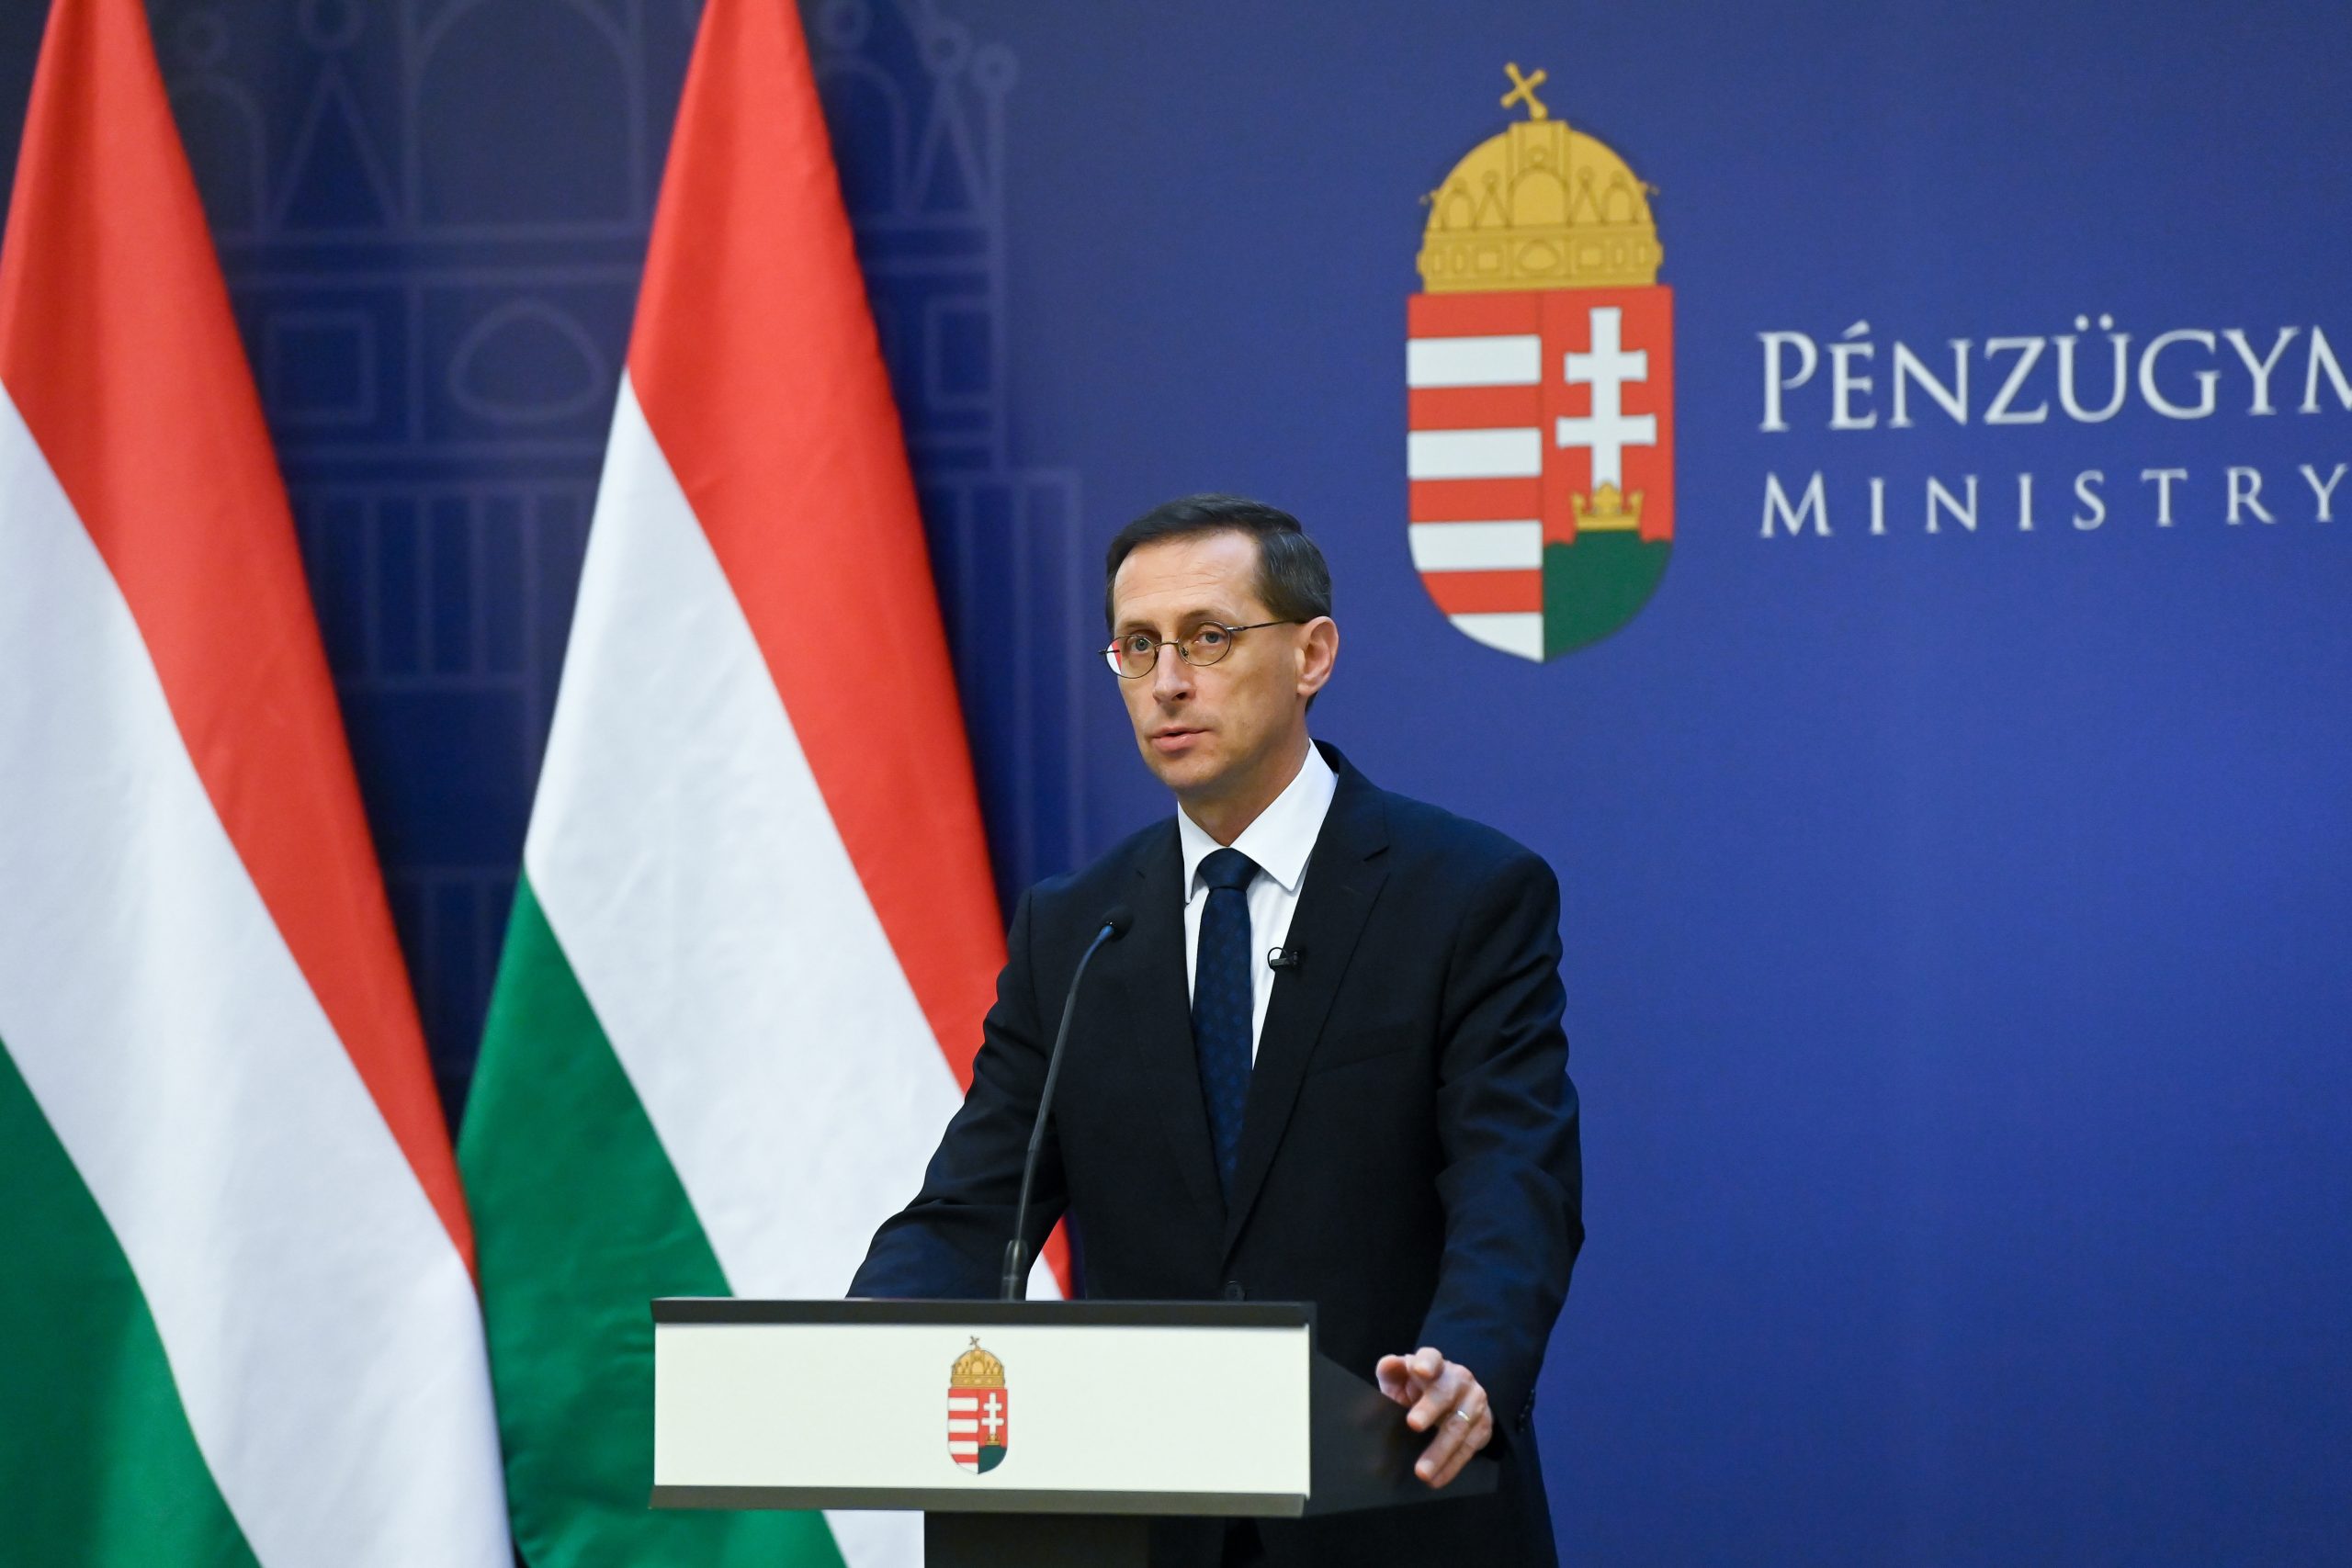 Hungary to Share in EBRD Support for Mitigating Impact of War